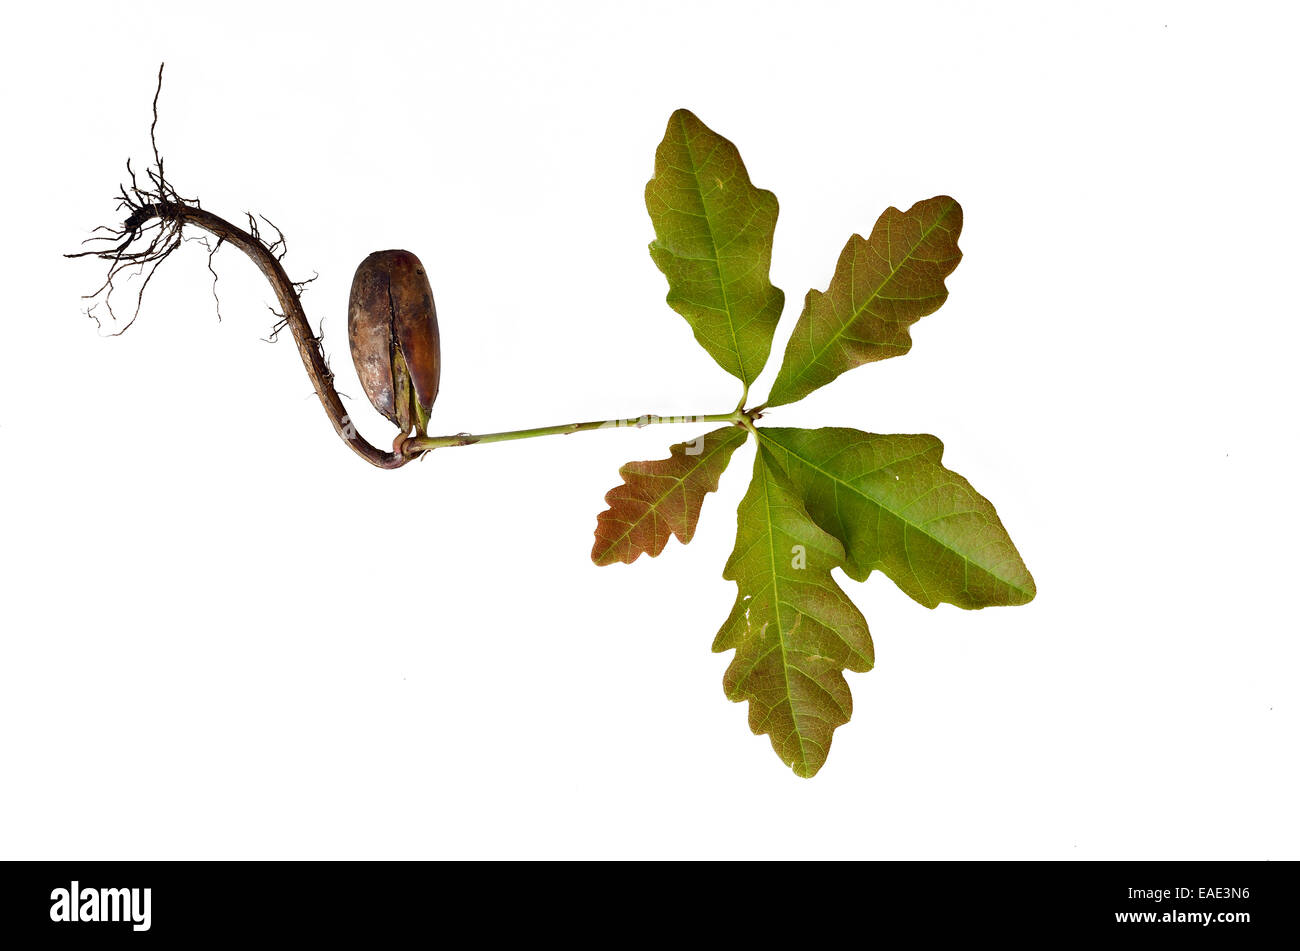 Oak (Quercus) seedling with a root, Burgenland, Austria Stock Photo